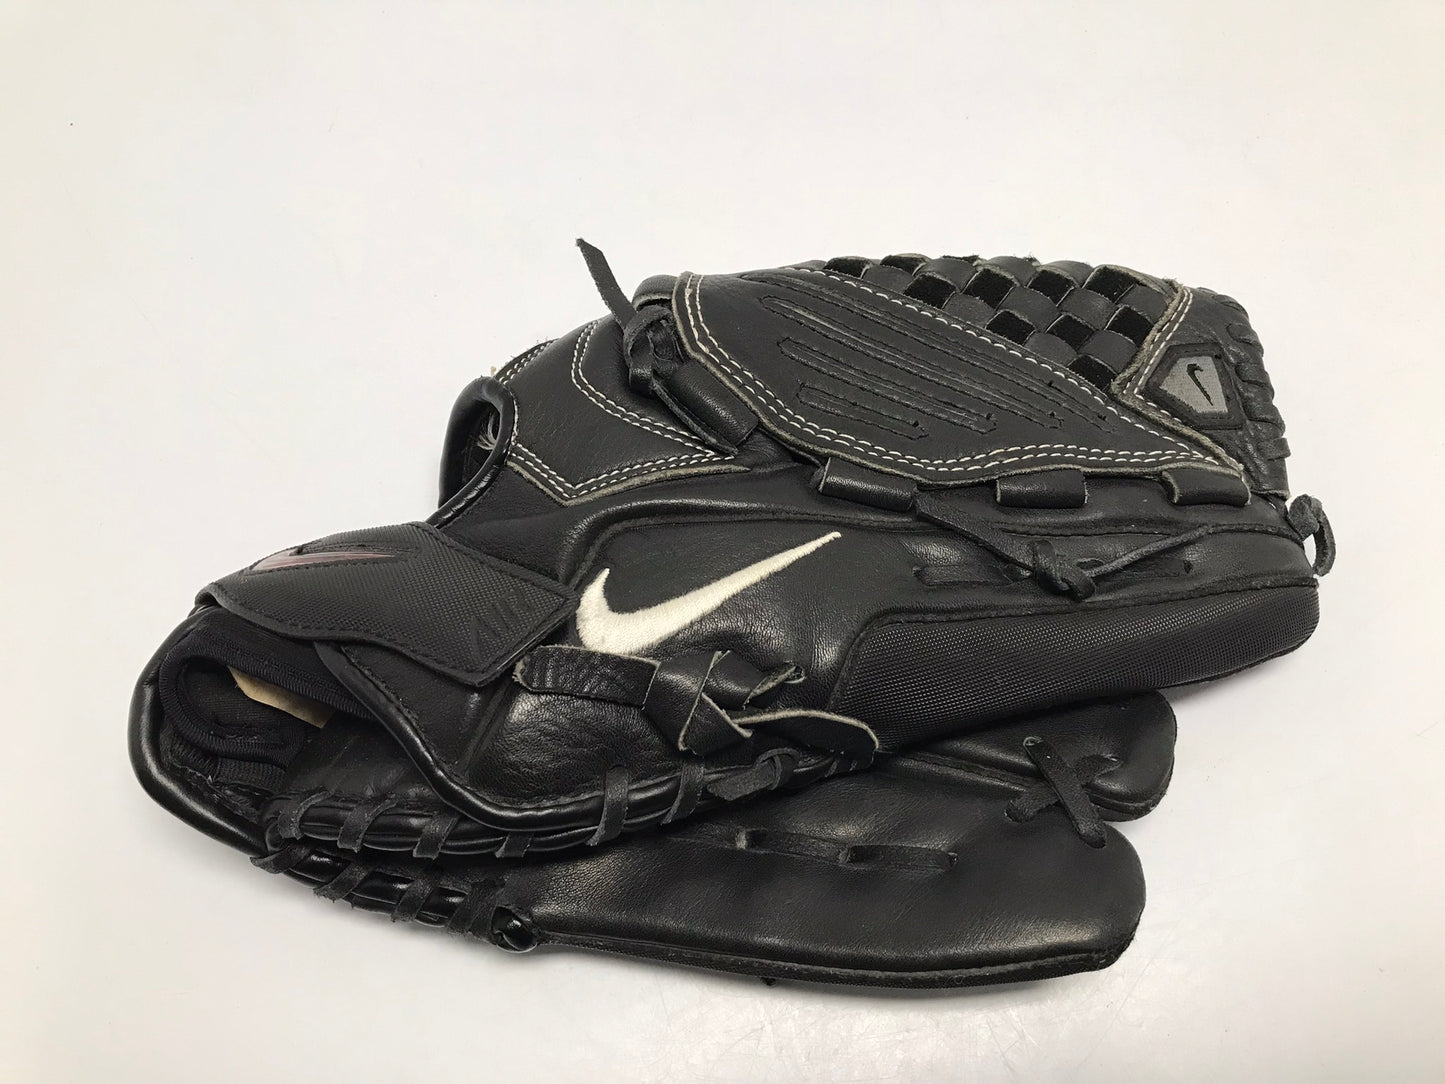 Baseball Glove Men's Size 13 inch Nike Supple Black Leather Fits On Left Hand Outstanding